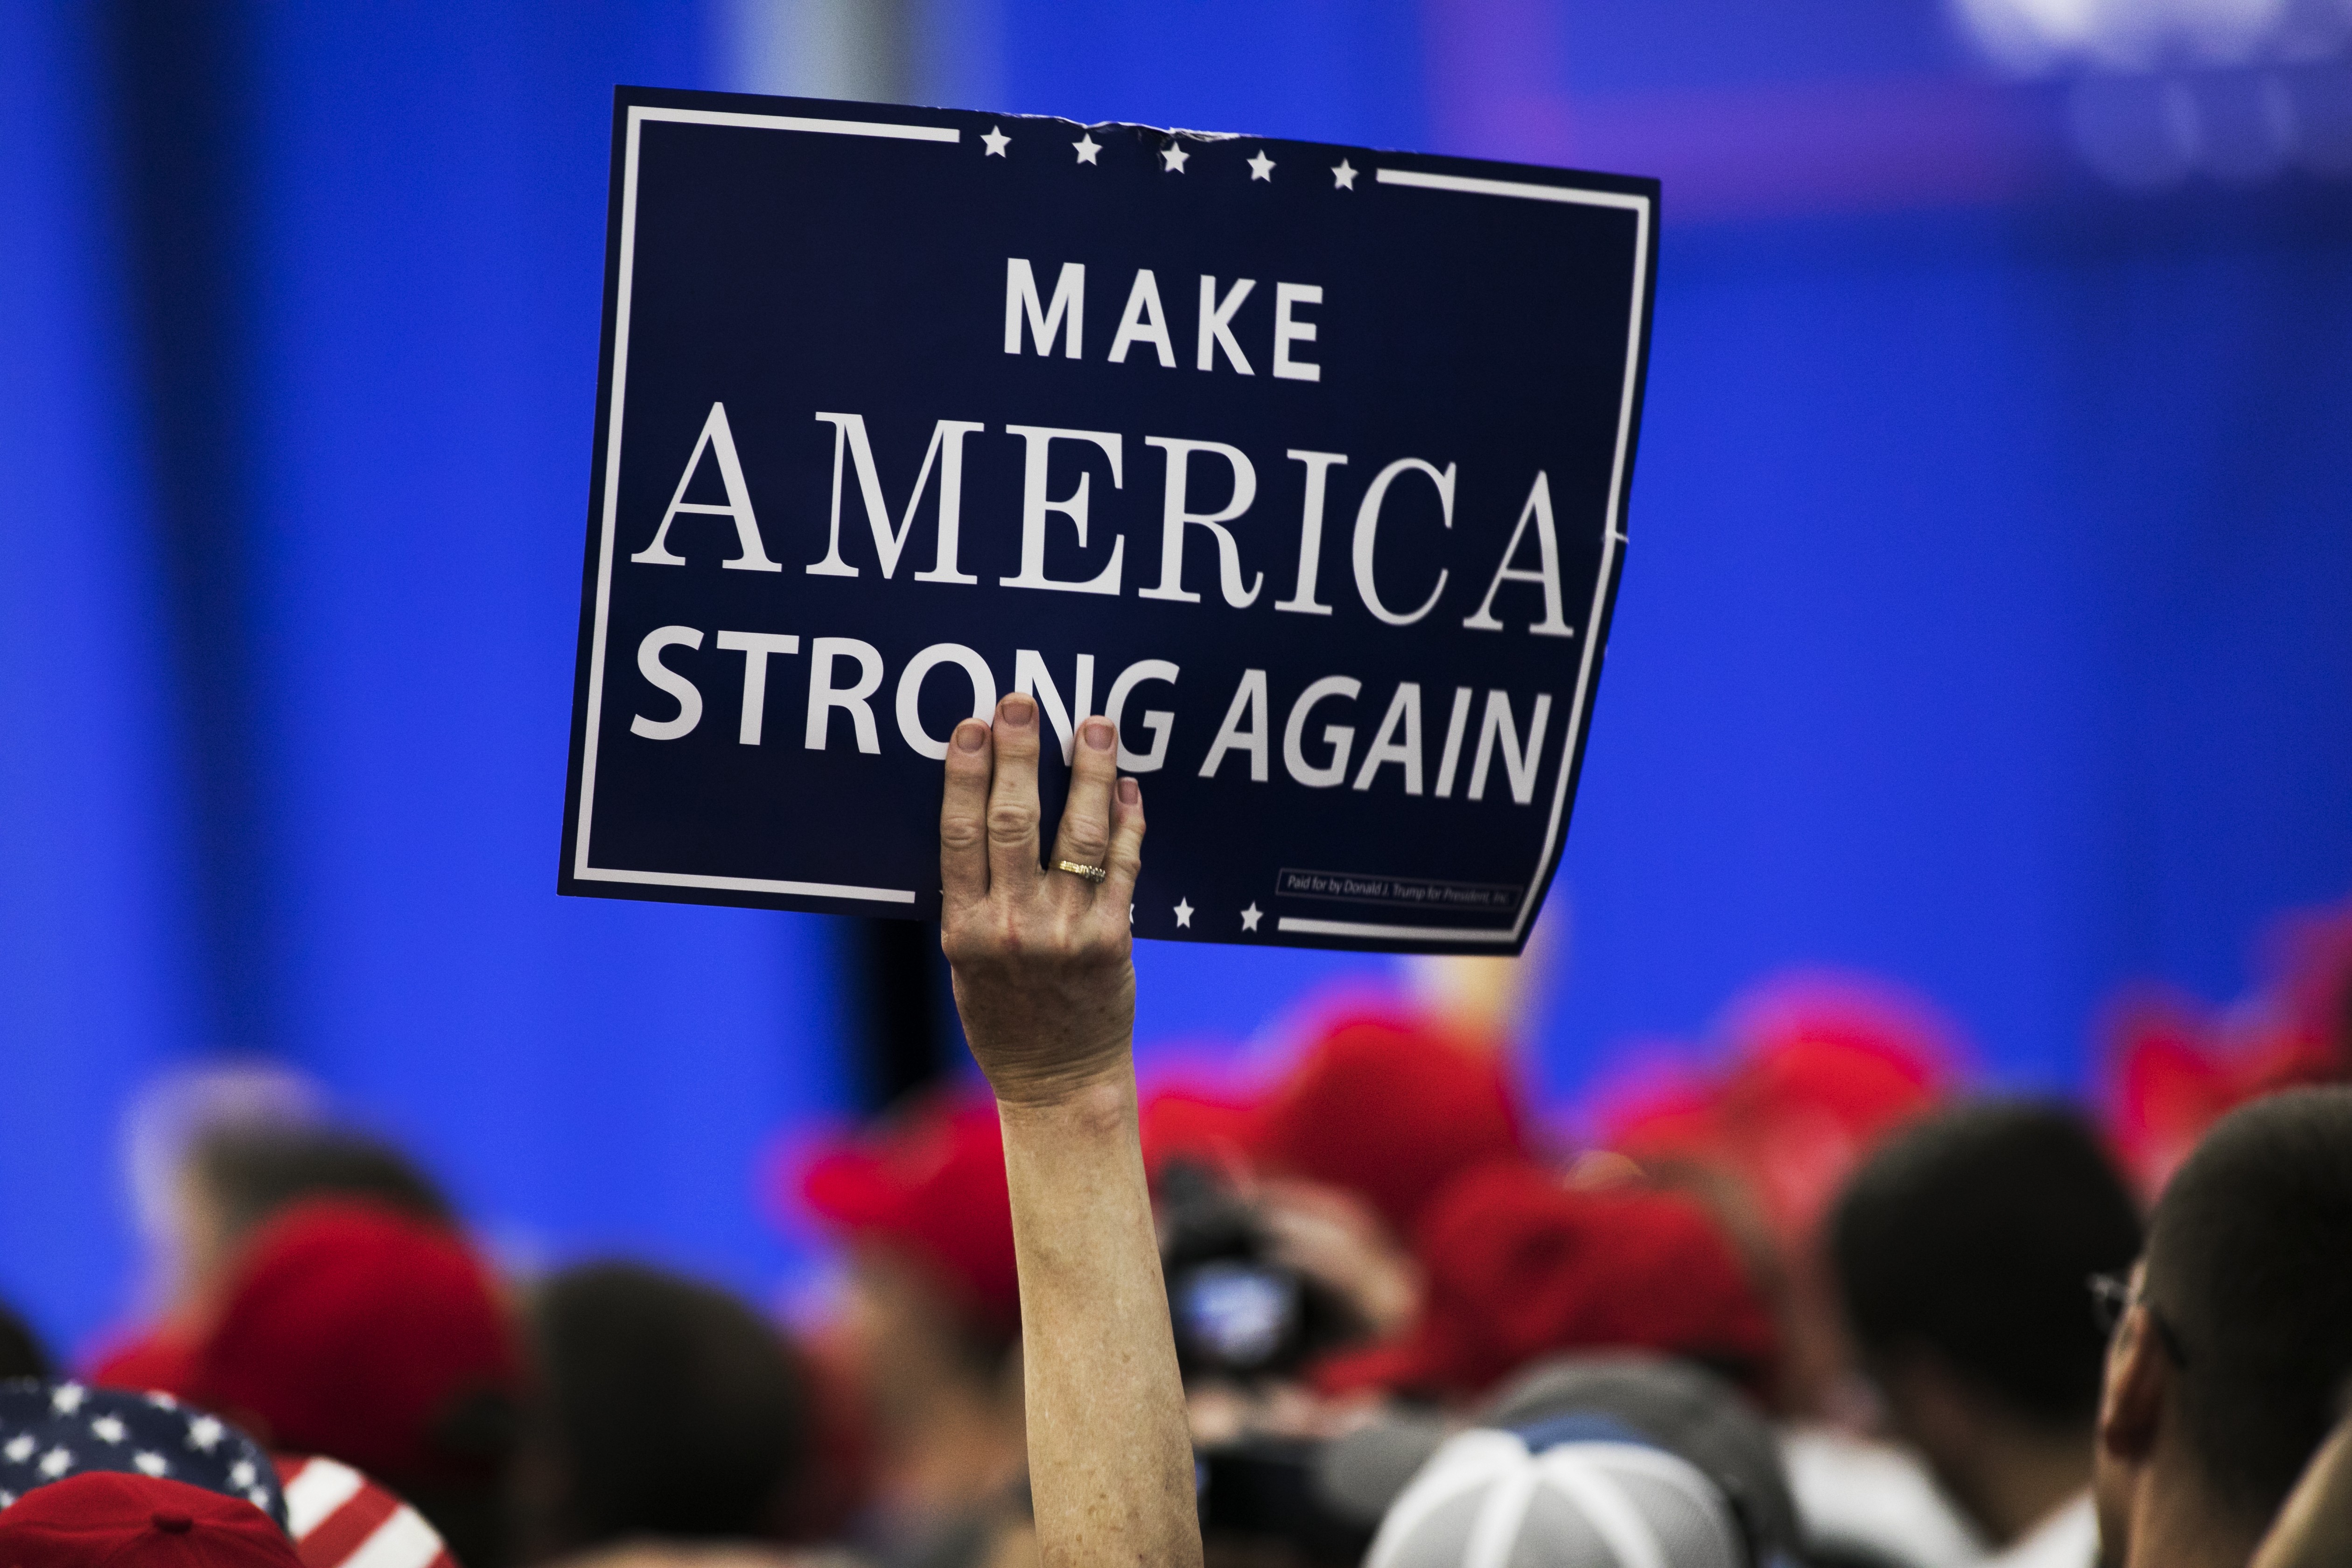 An attendee holds a placard during a rally with US President Donald Trump in Ohio, on August 4, 2018, when Trump defended his use of tariffs that have inflamed tensions with China and Europe, telling an audience of supporters that playing hardball on trade is "my thing". Photo: Bloomberg